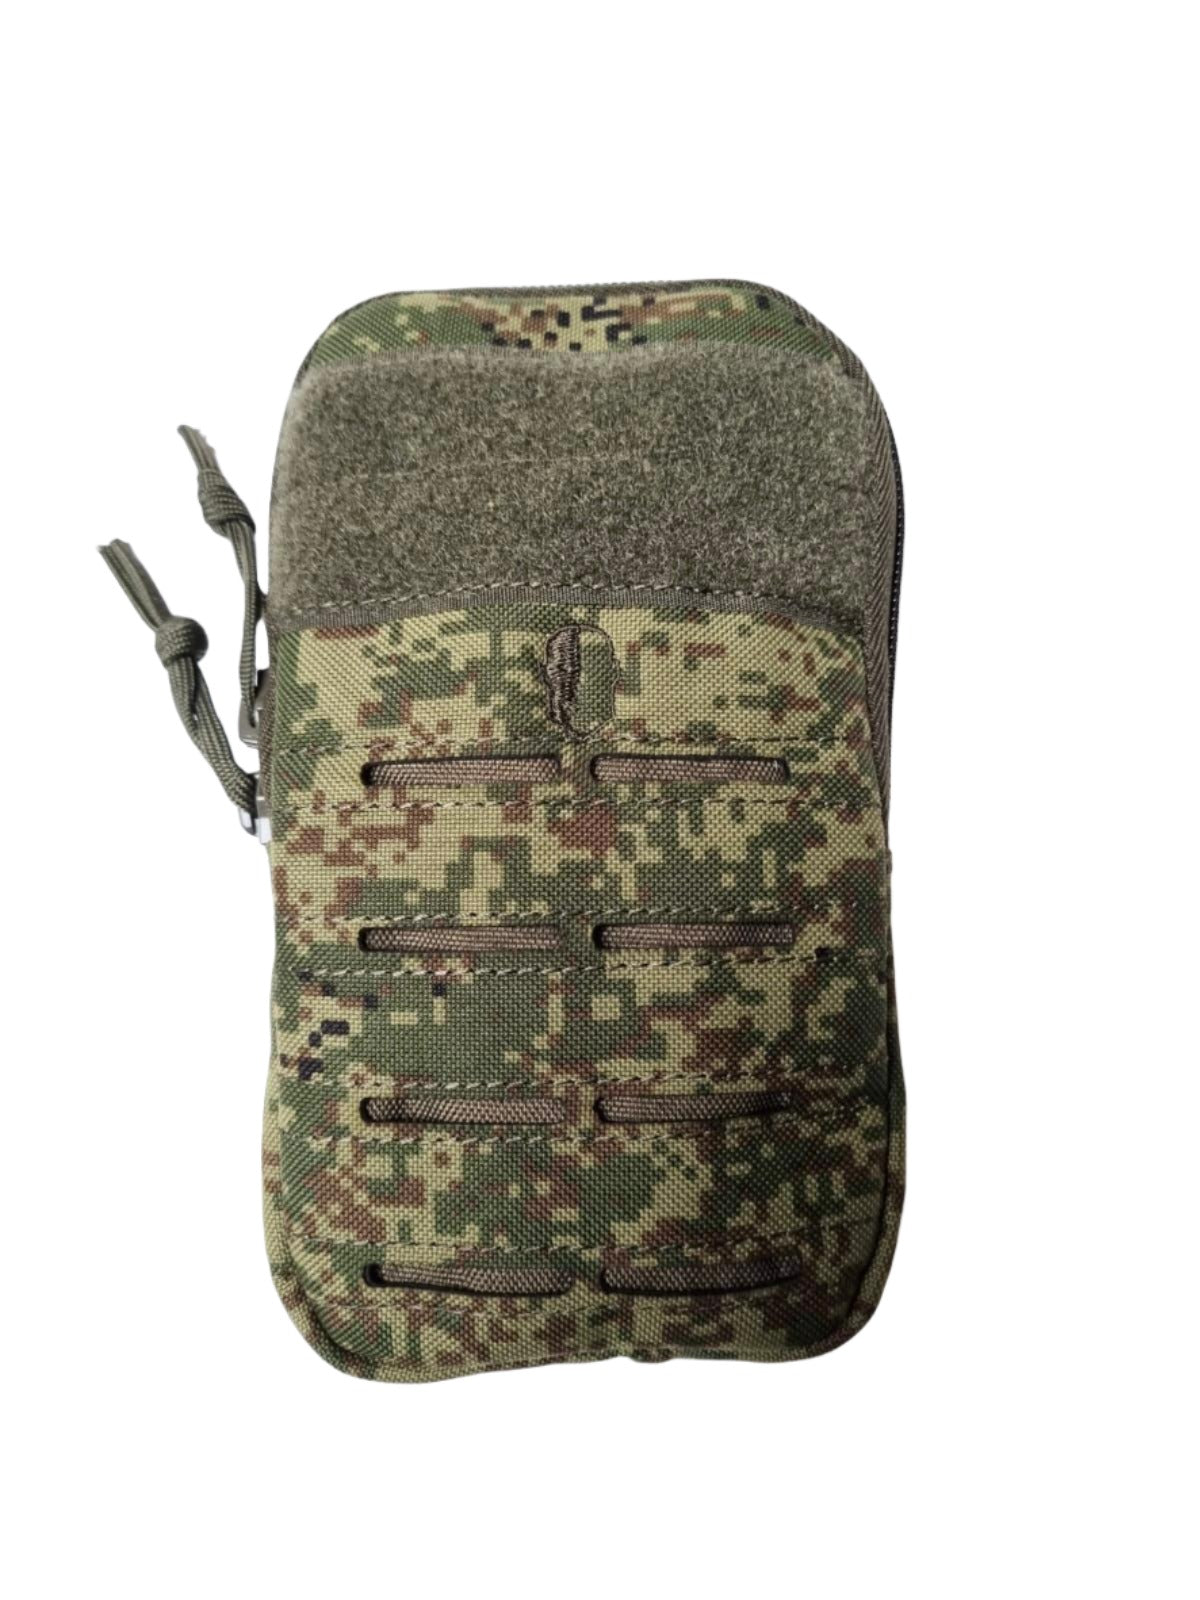 SHS-1038-Cell Phone Pouch with Molle loop-DIGI FLORA